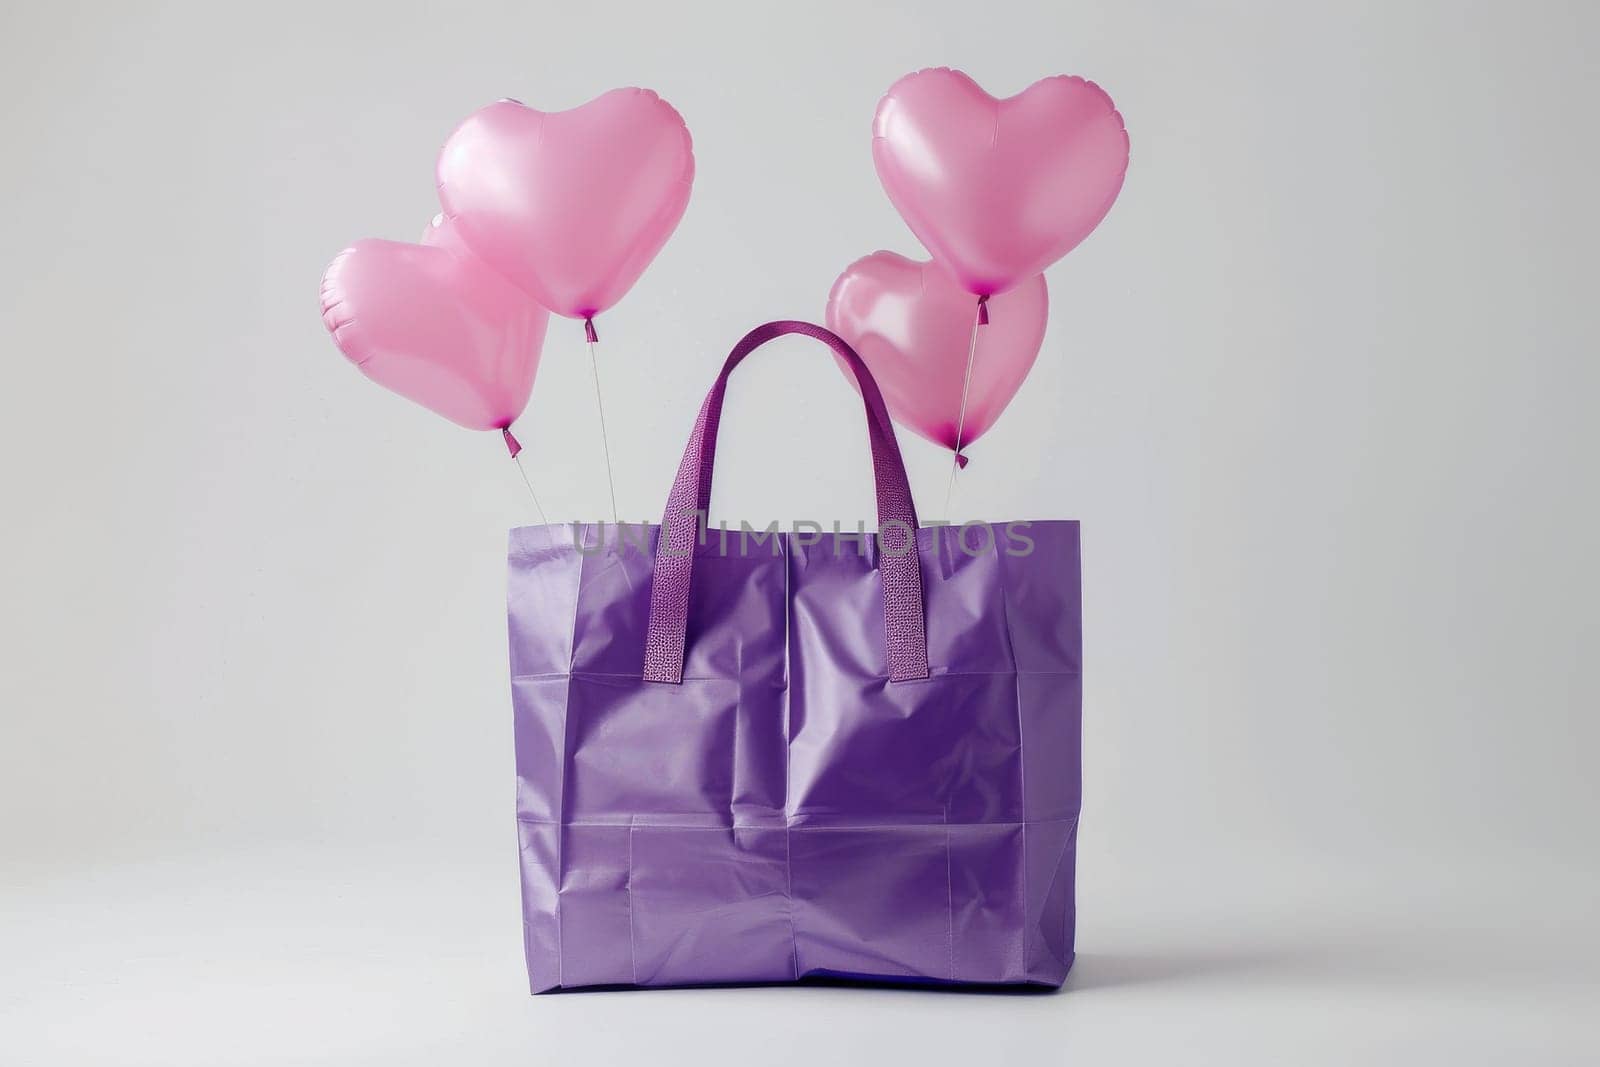 A purple bag with pink balloons on top of it. The balloons are heart shaped and are scattered around the bag. The scene gives off a festive and celebratory mood